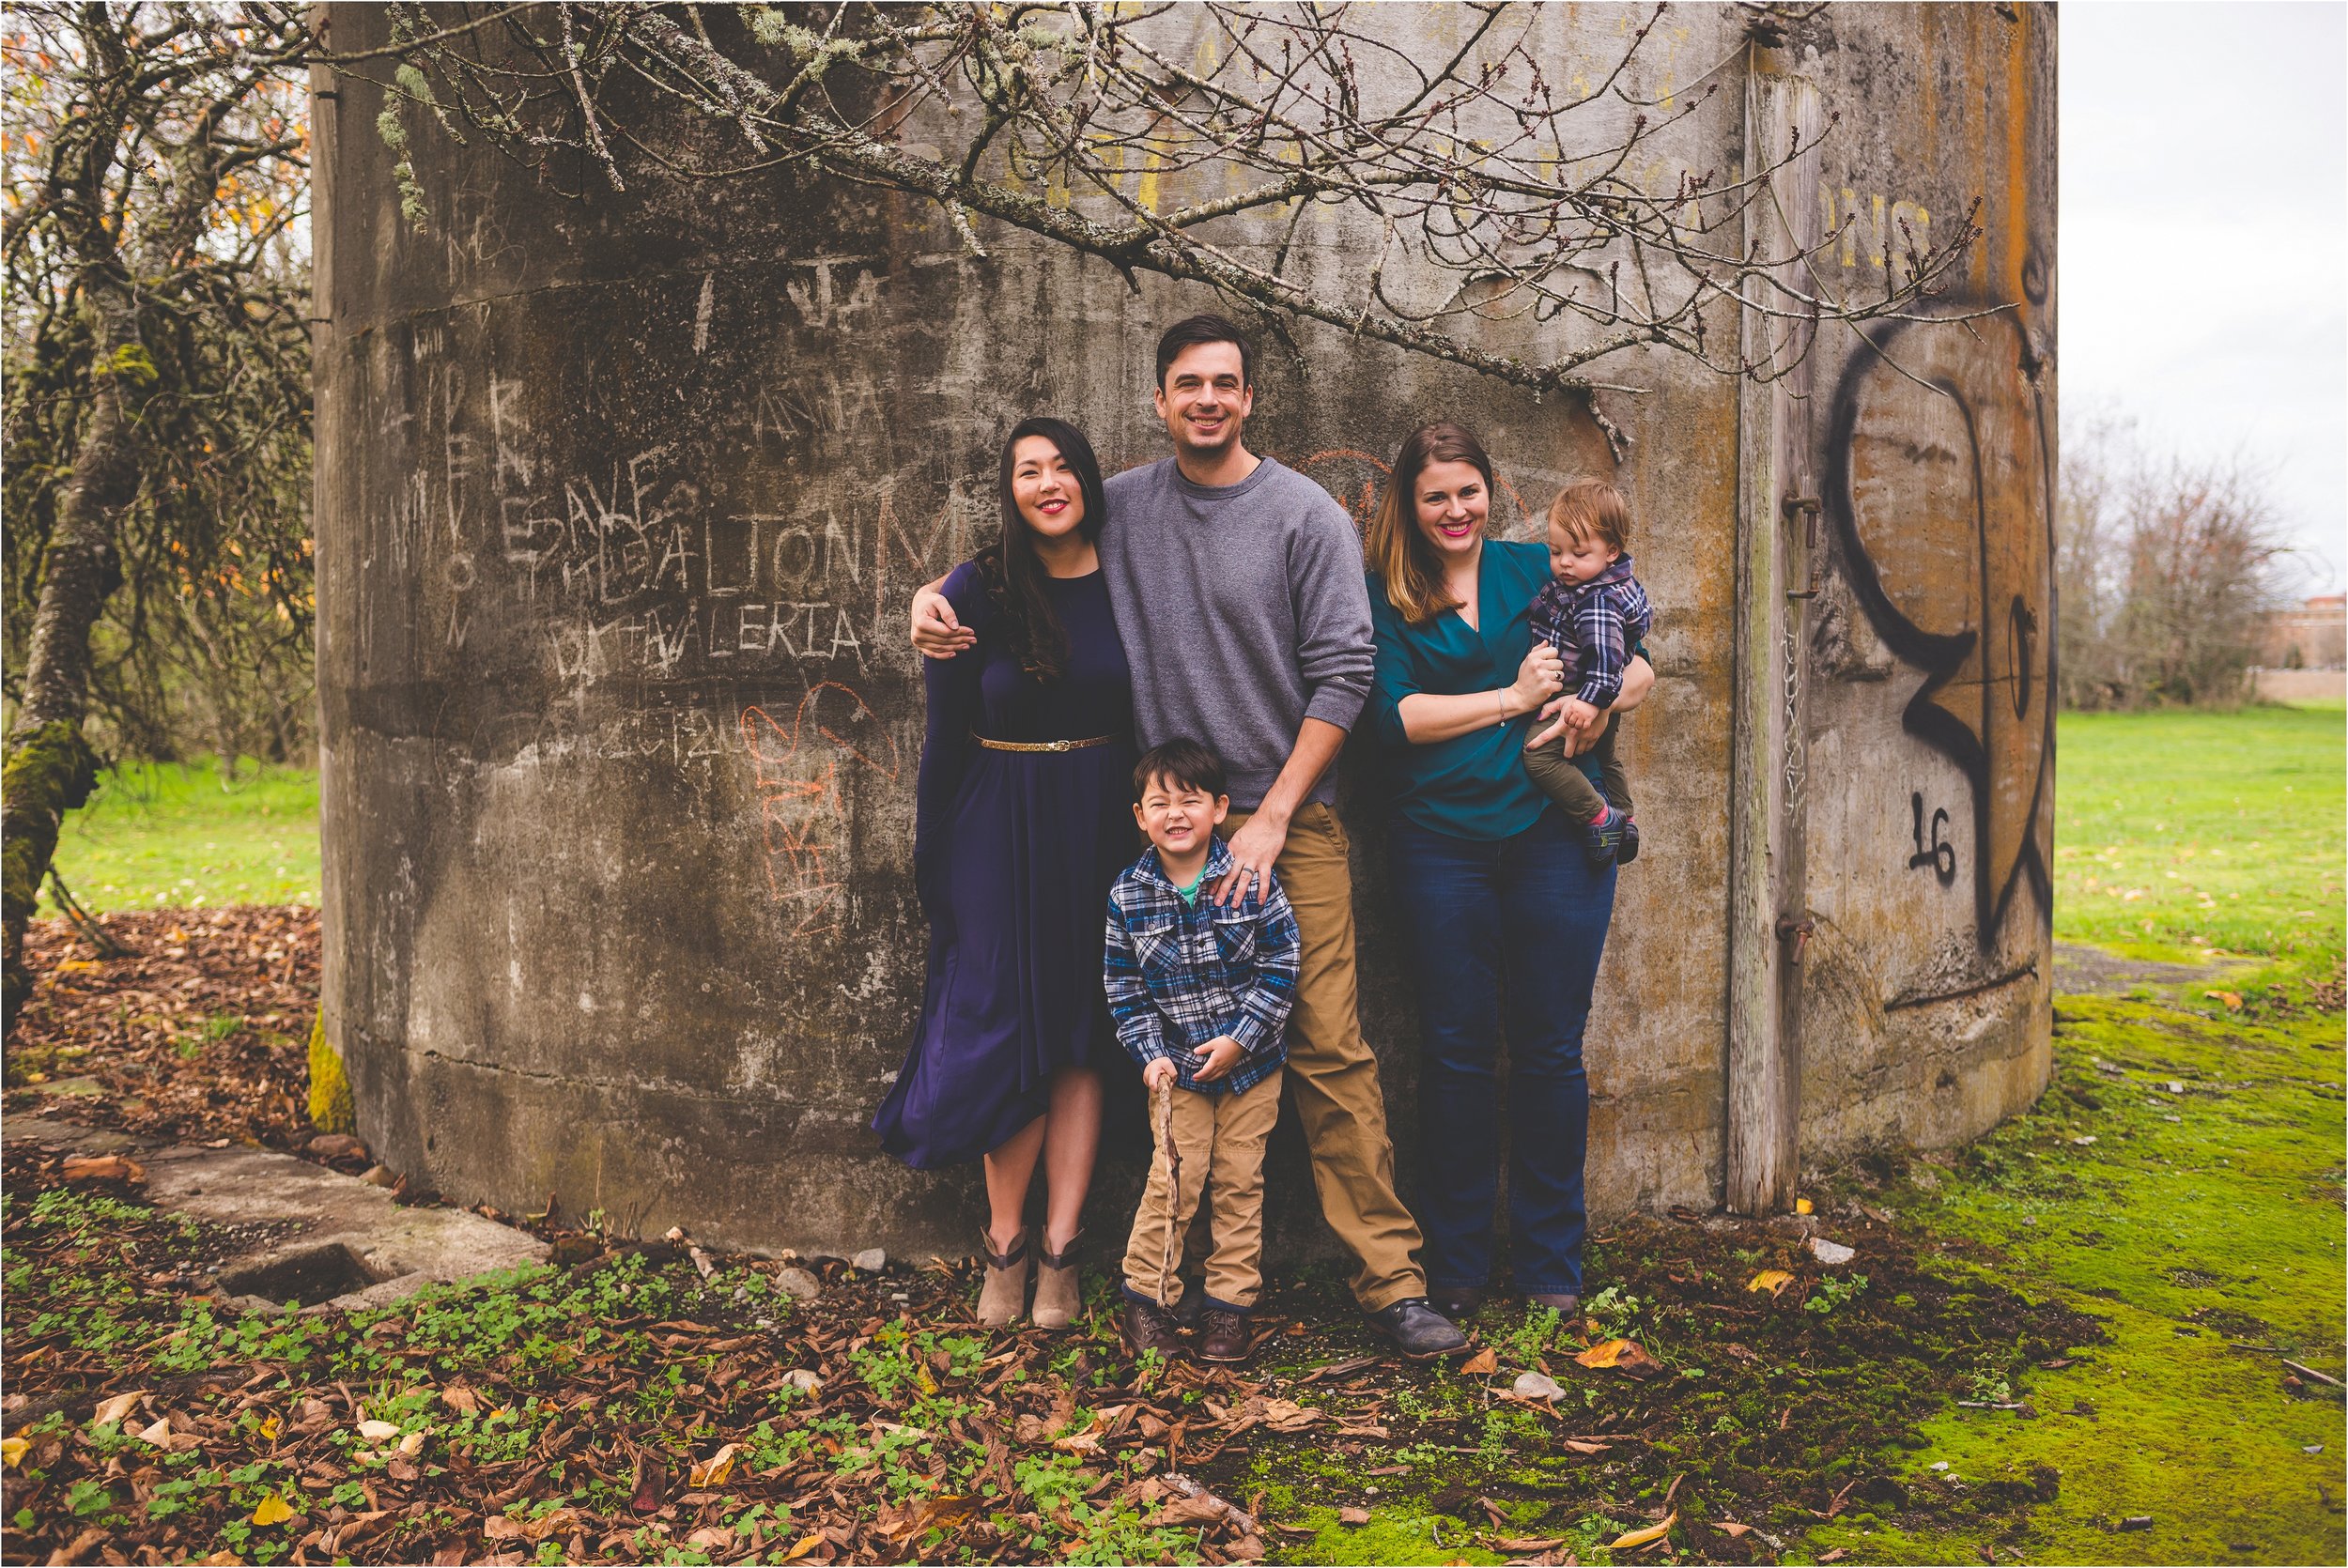 fort-steilacoom-park-family-session-jannicka-mayte-pacific-northwest-lifestyle-photographer_0021.jpg